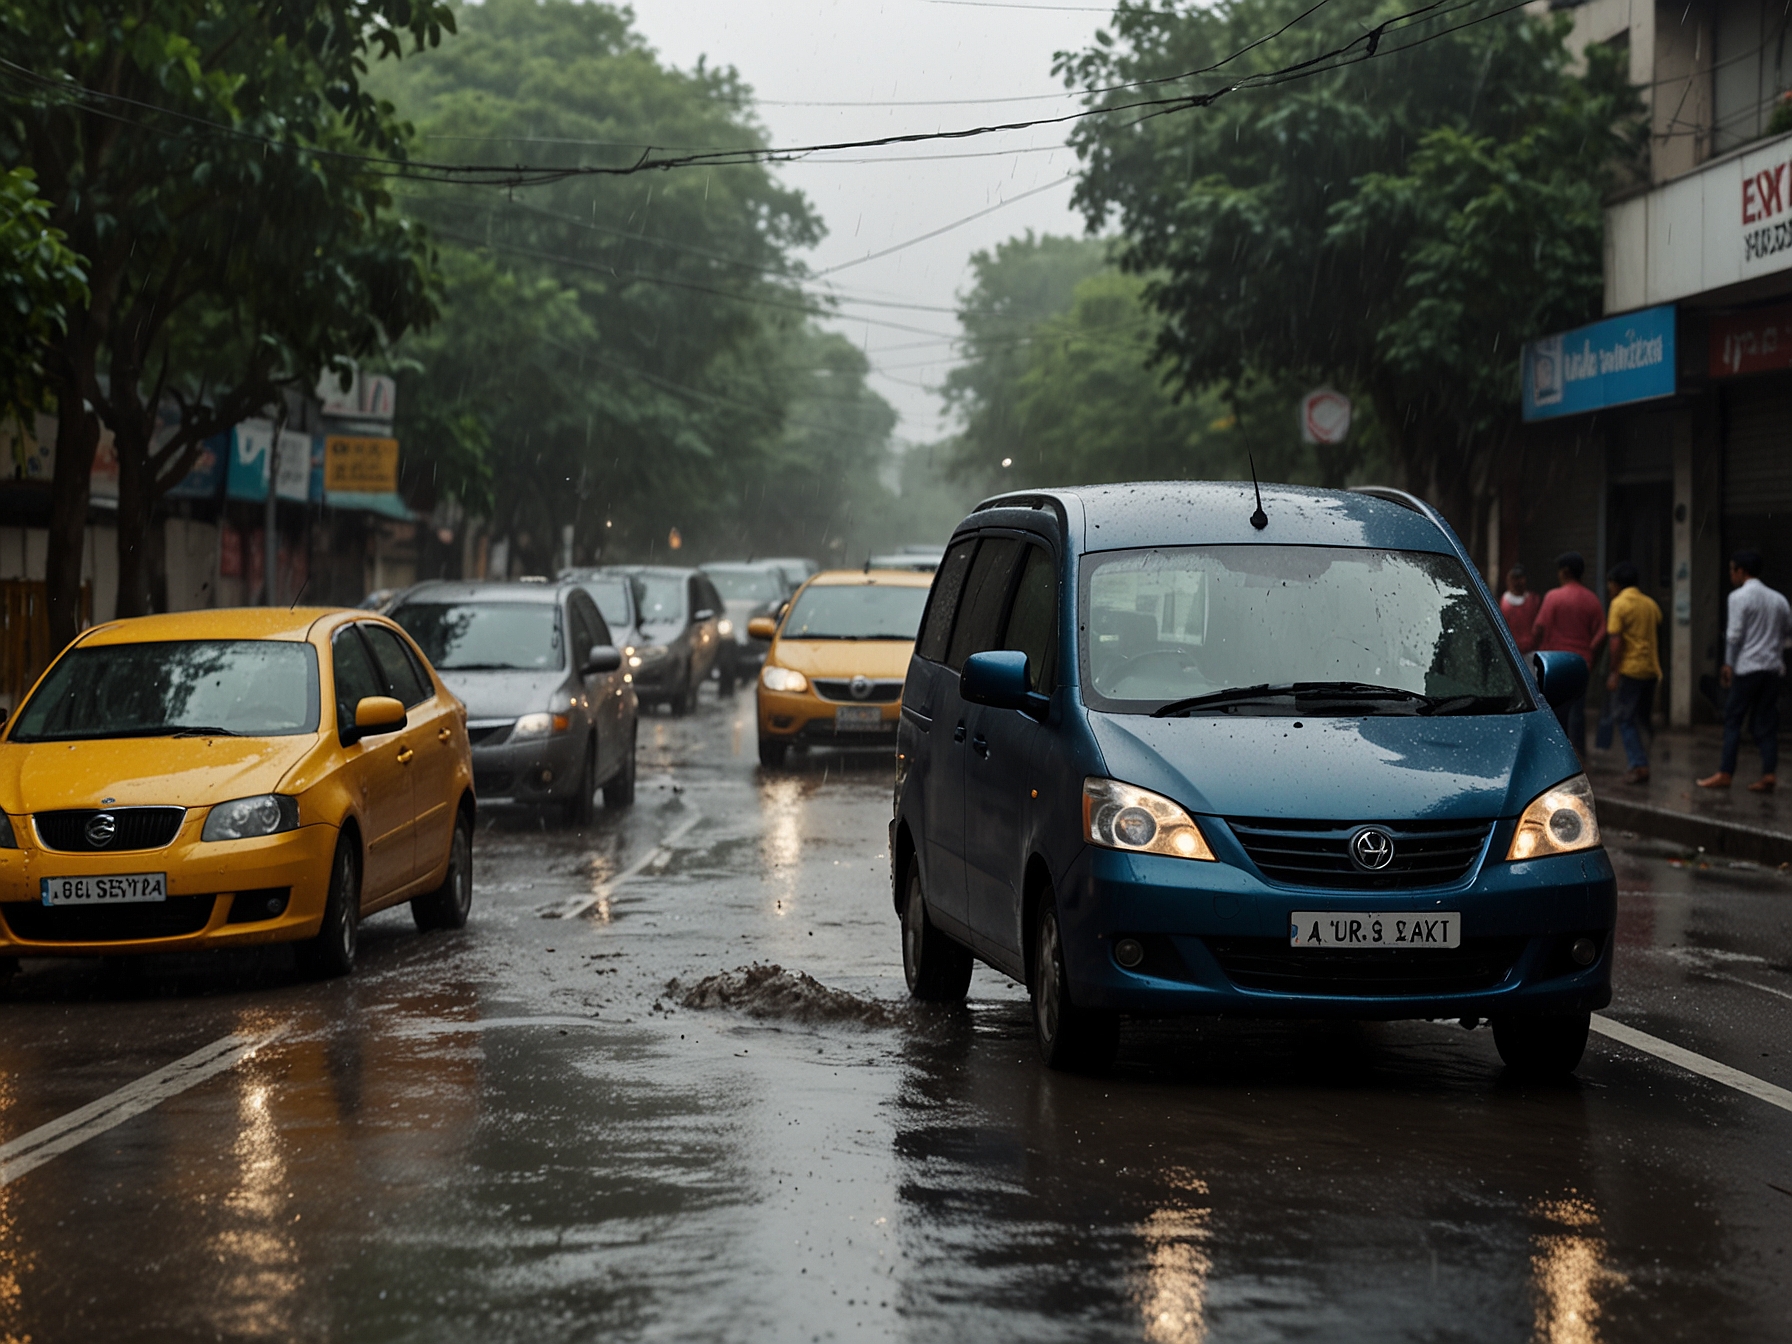 Delhi streets experiencing heavy waterlogging and traffic snarls as the city grapples with torrential downpours following the IMD's yellow weather alert.